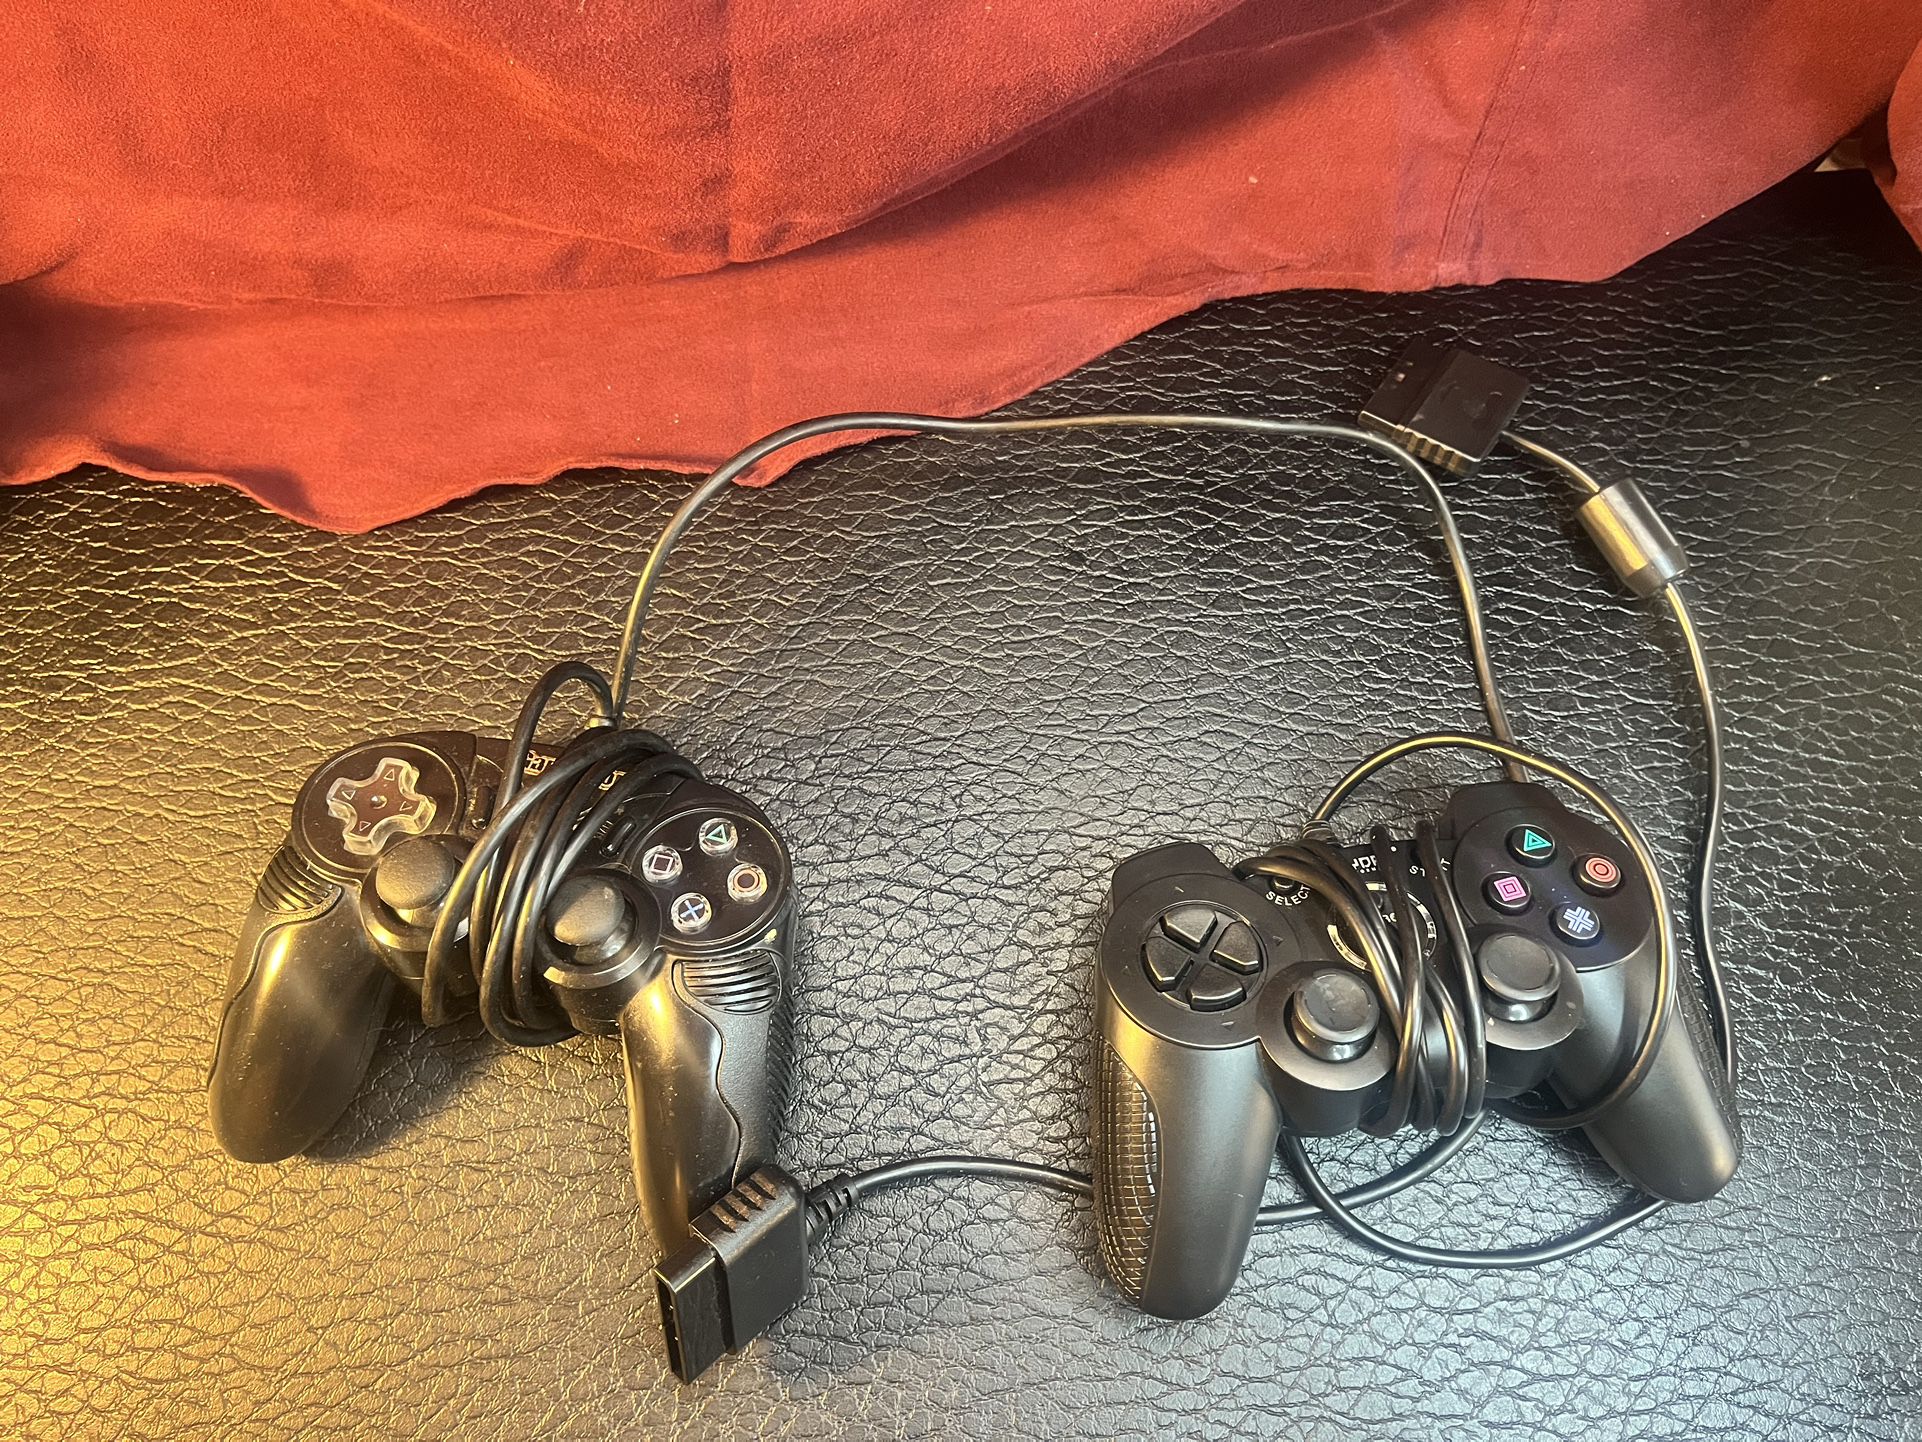 Sony PS2 Controller (set Of 2)